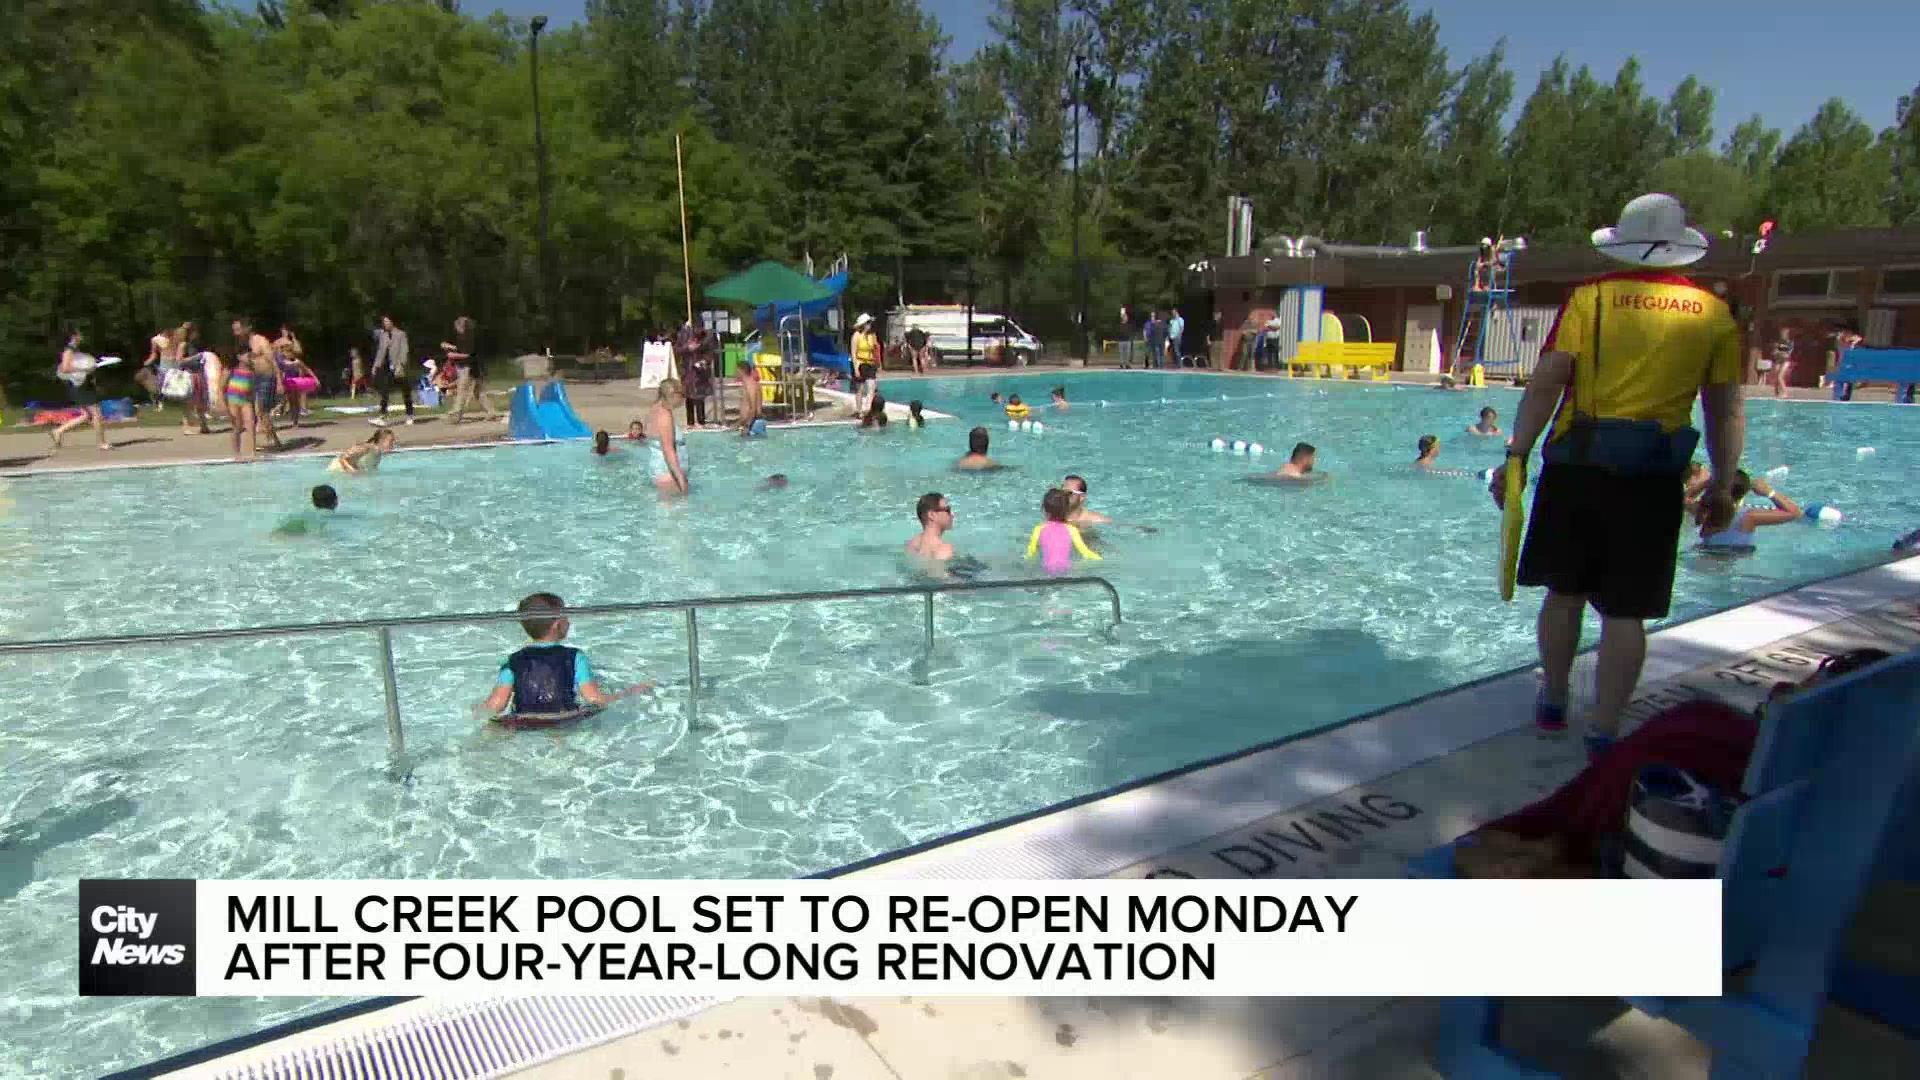 Mill Creek Pool unveiled Friday: Set to open Monday